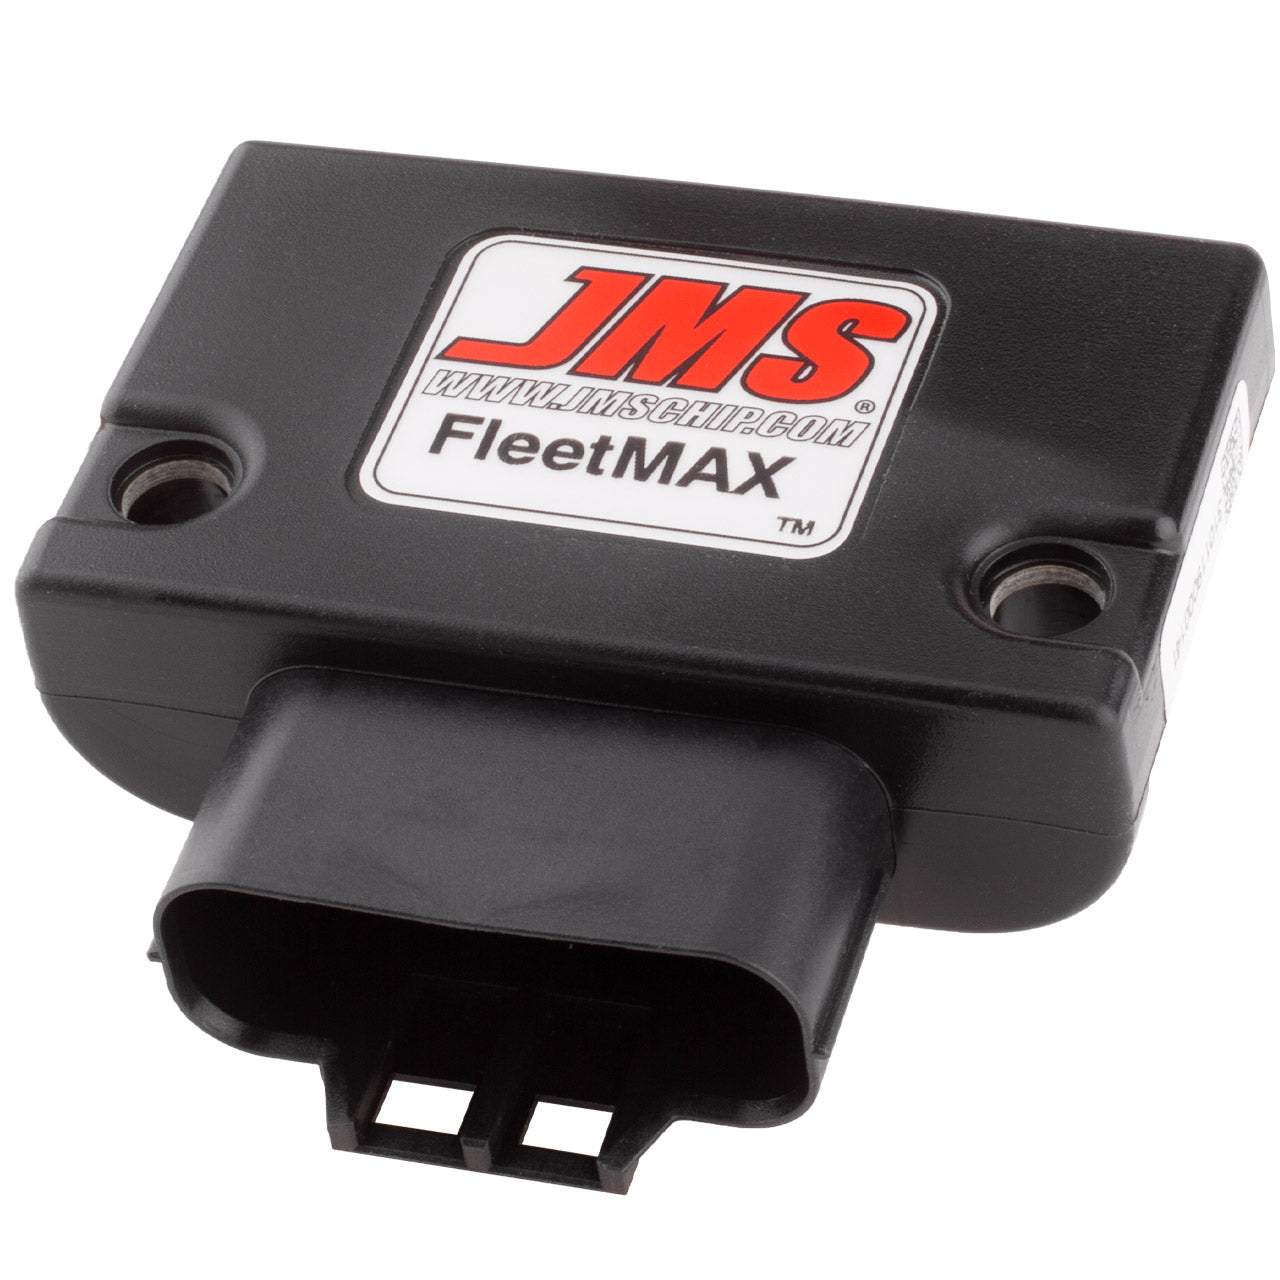 JMS FleetMAX Speed Control Device. Plug and Play for 2012 - 2018 Mercedes Benz Sprinter Vehicles with electronic throttle control FX71116MBV1